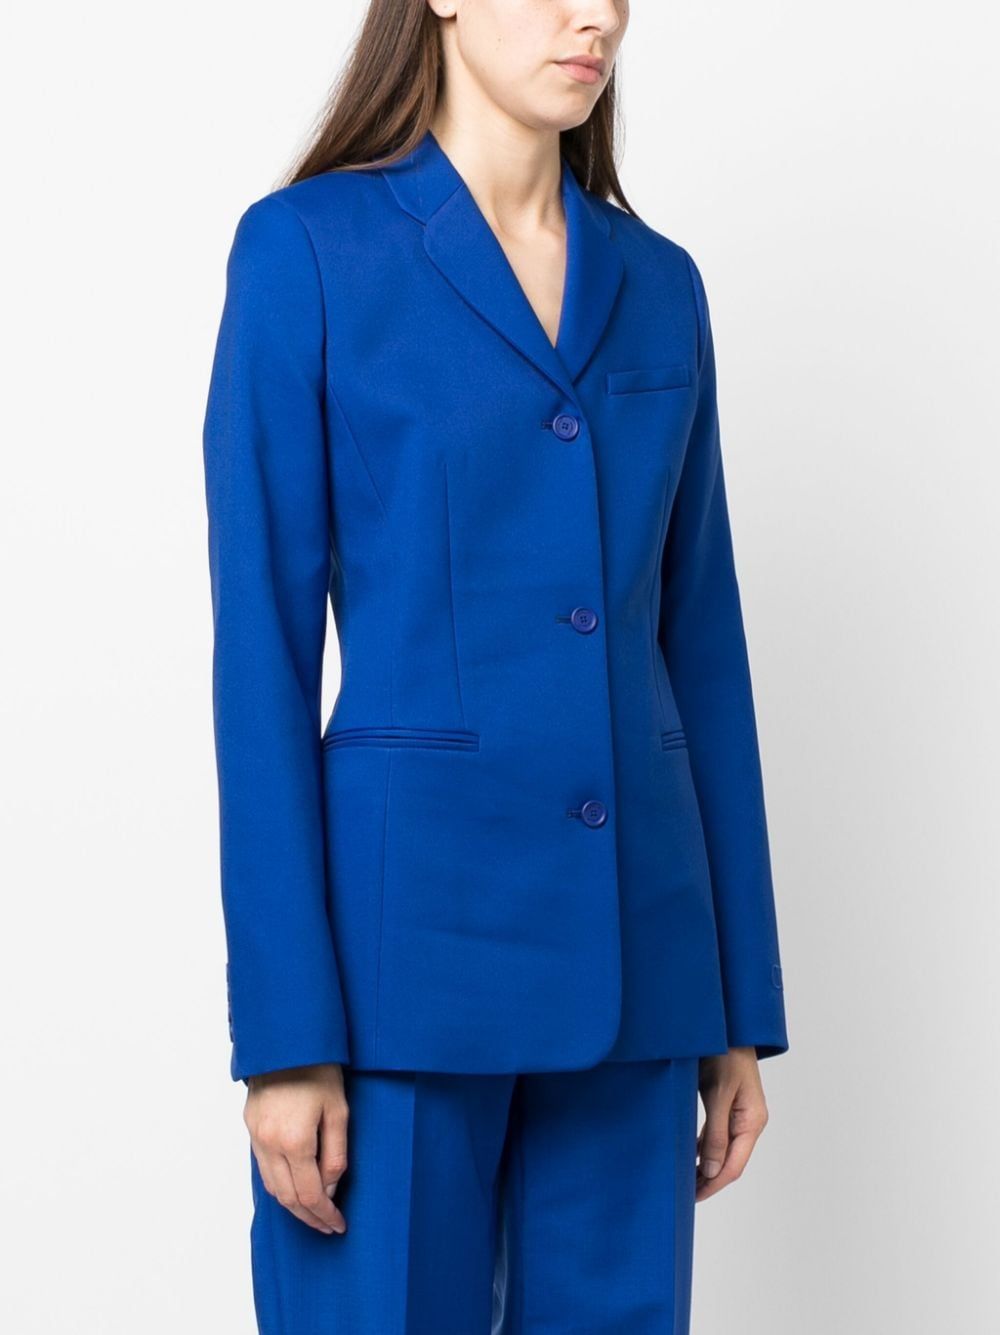 OFF-WHITE Slim Fit Blue Tech Drill Tailoring Jacket for Women - FW23 Collection